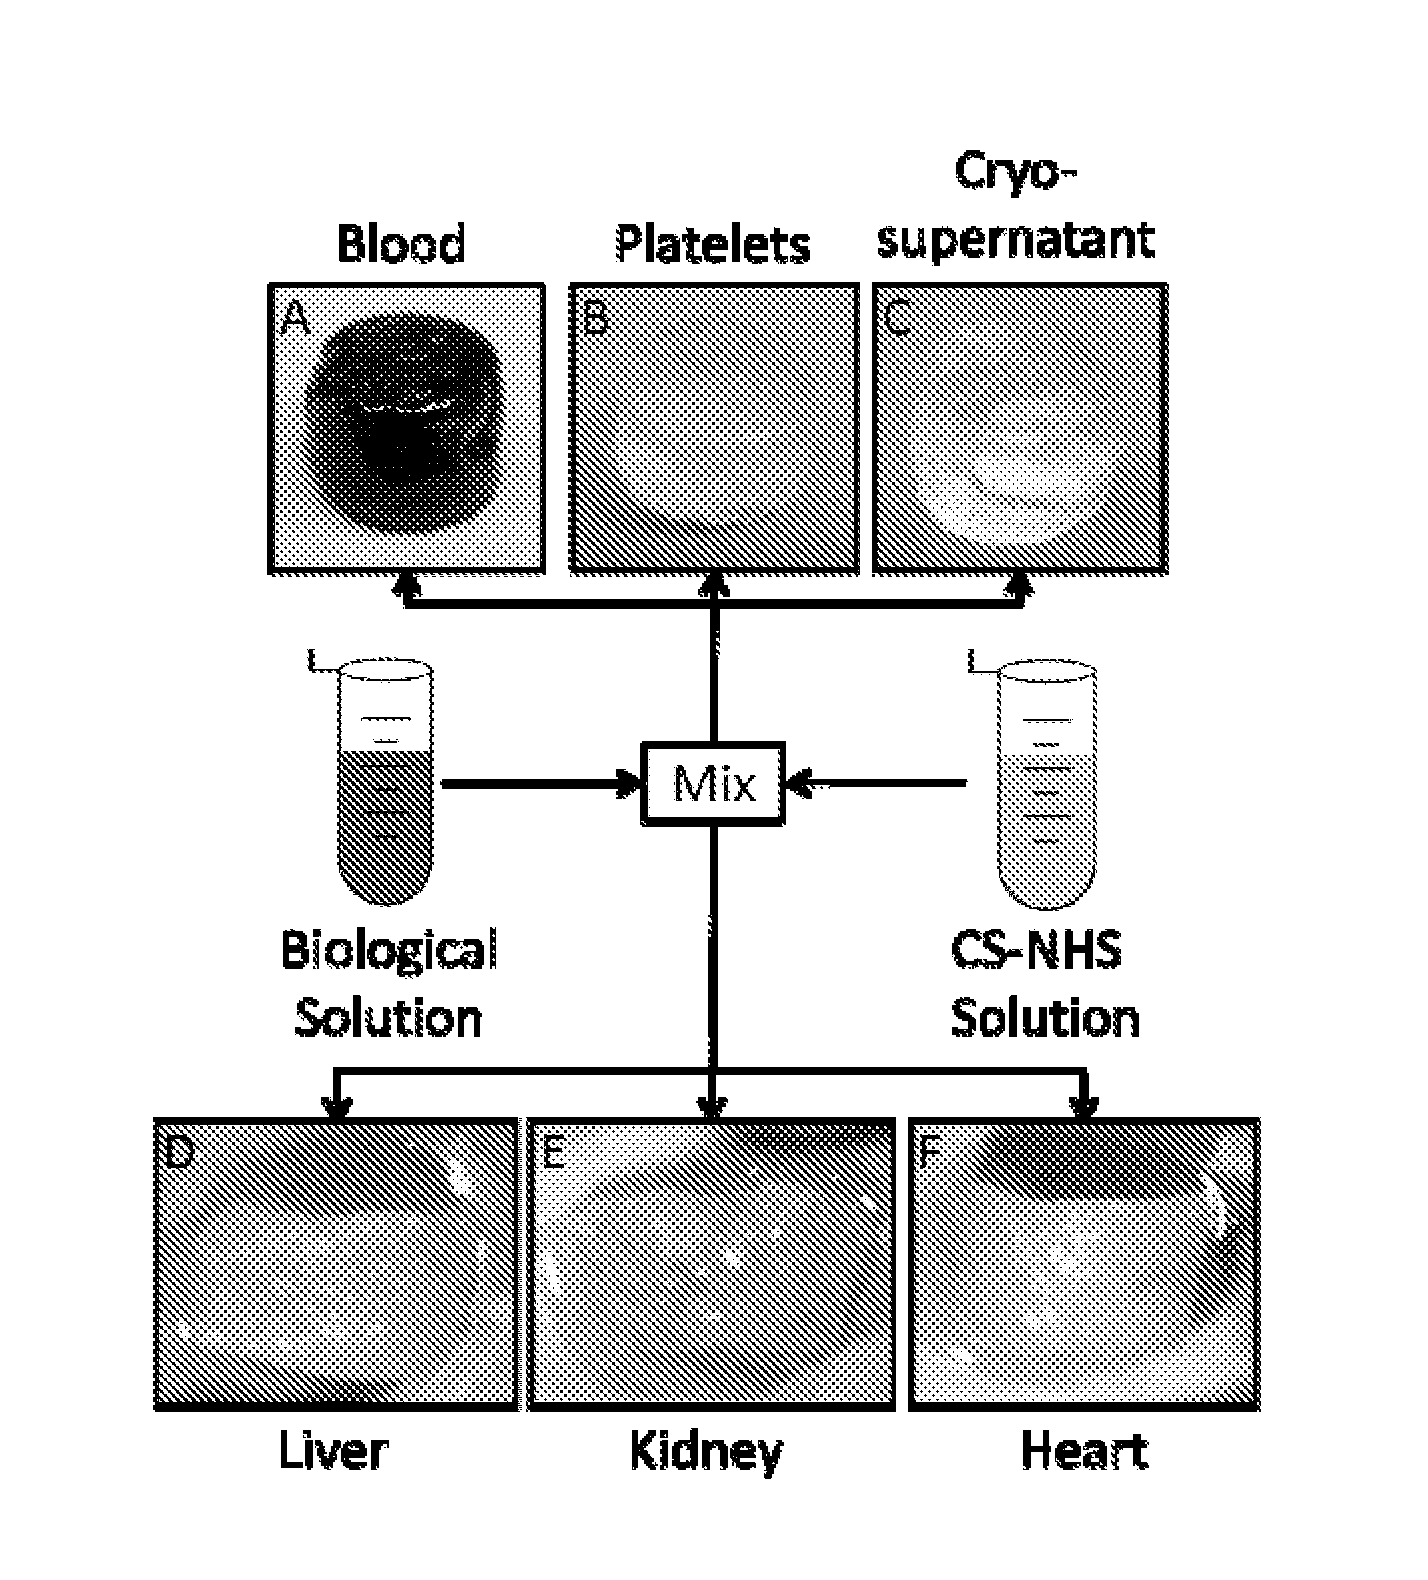 Intraoperative and blood derived adhesives